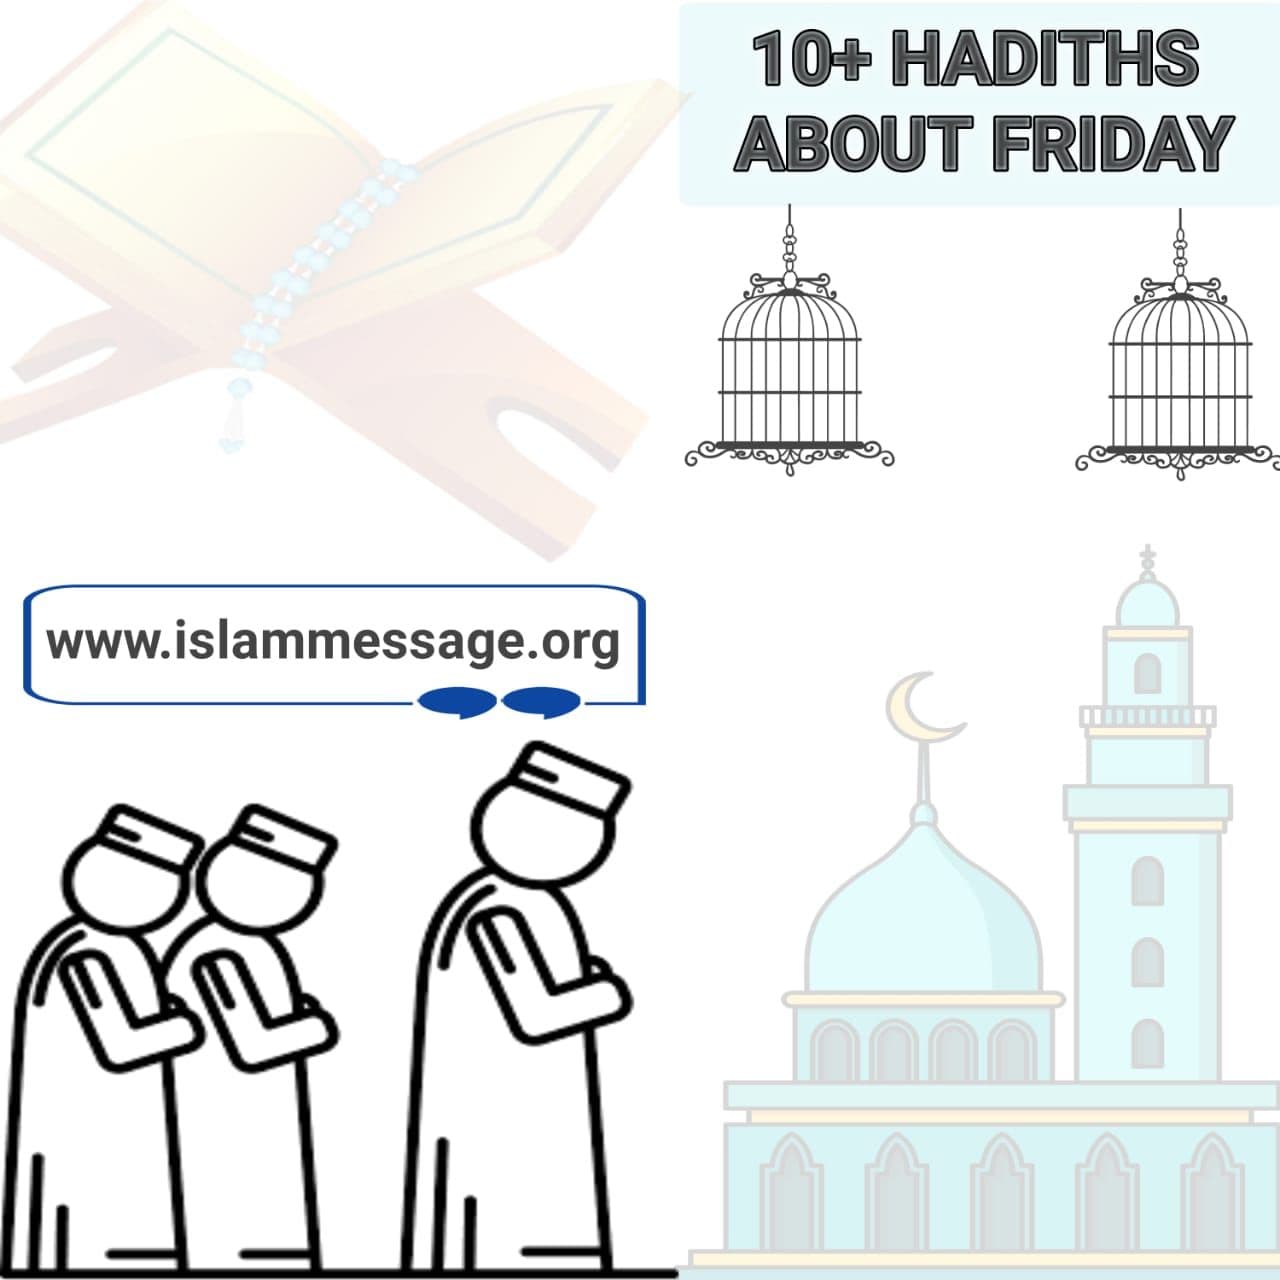 10+ Hadiths about Friday and quran 